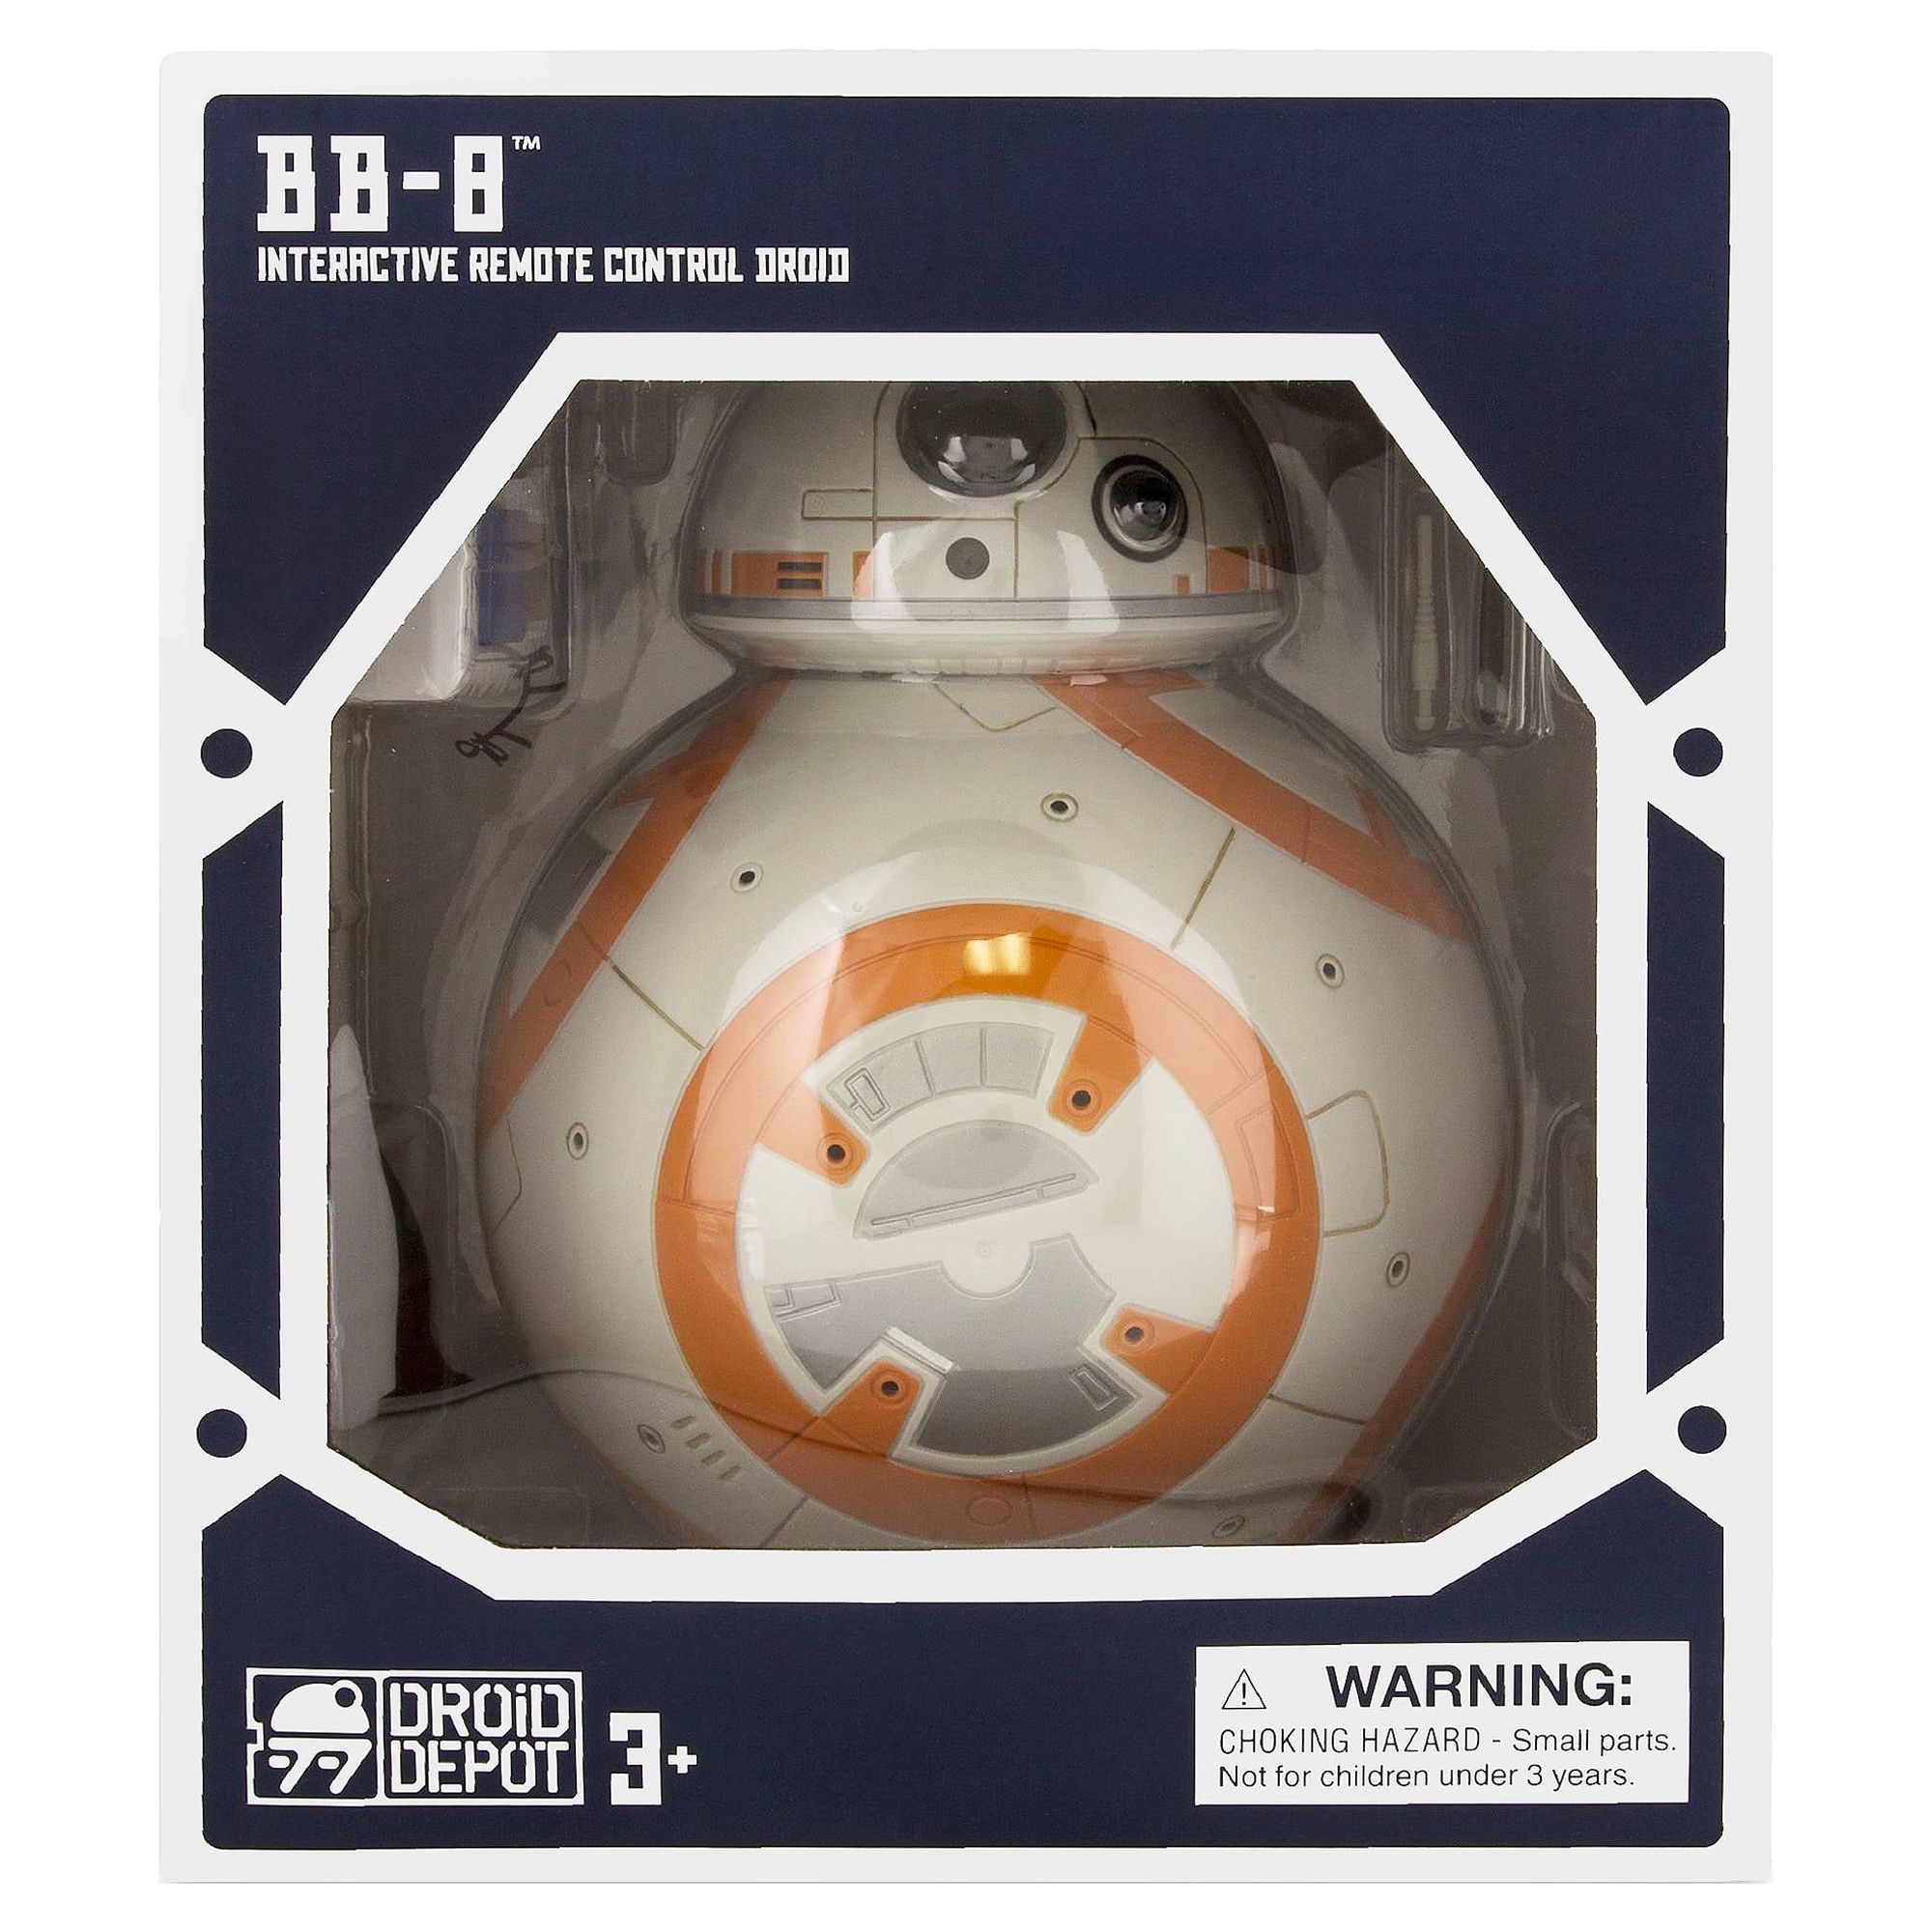 Disney Star Wars BB-8 Interactive Remote Control Droid Depot - H 11 2/5'' (to the top of his antenna) x L 7 1/8" x W 7 1/8" - image 1 of 3